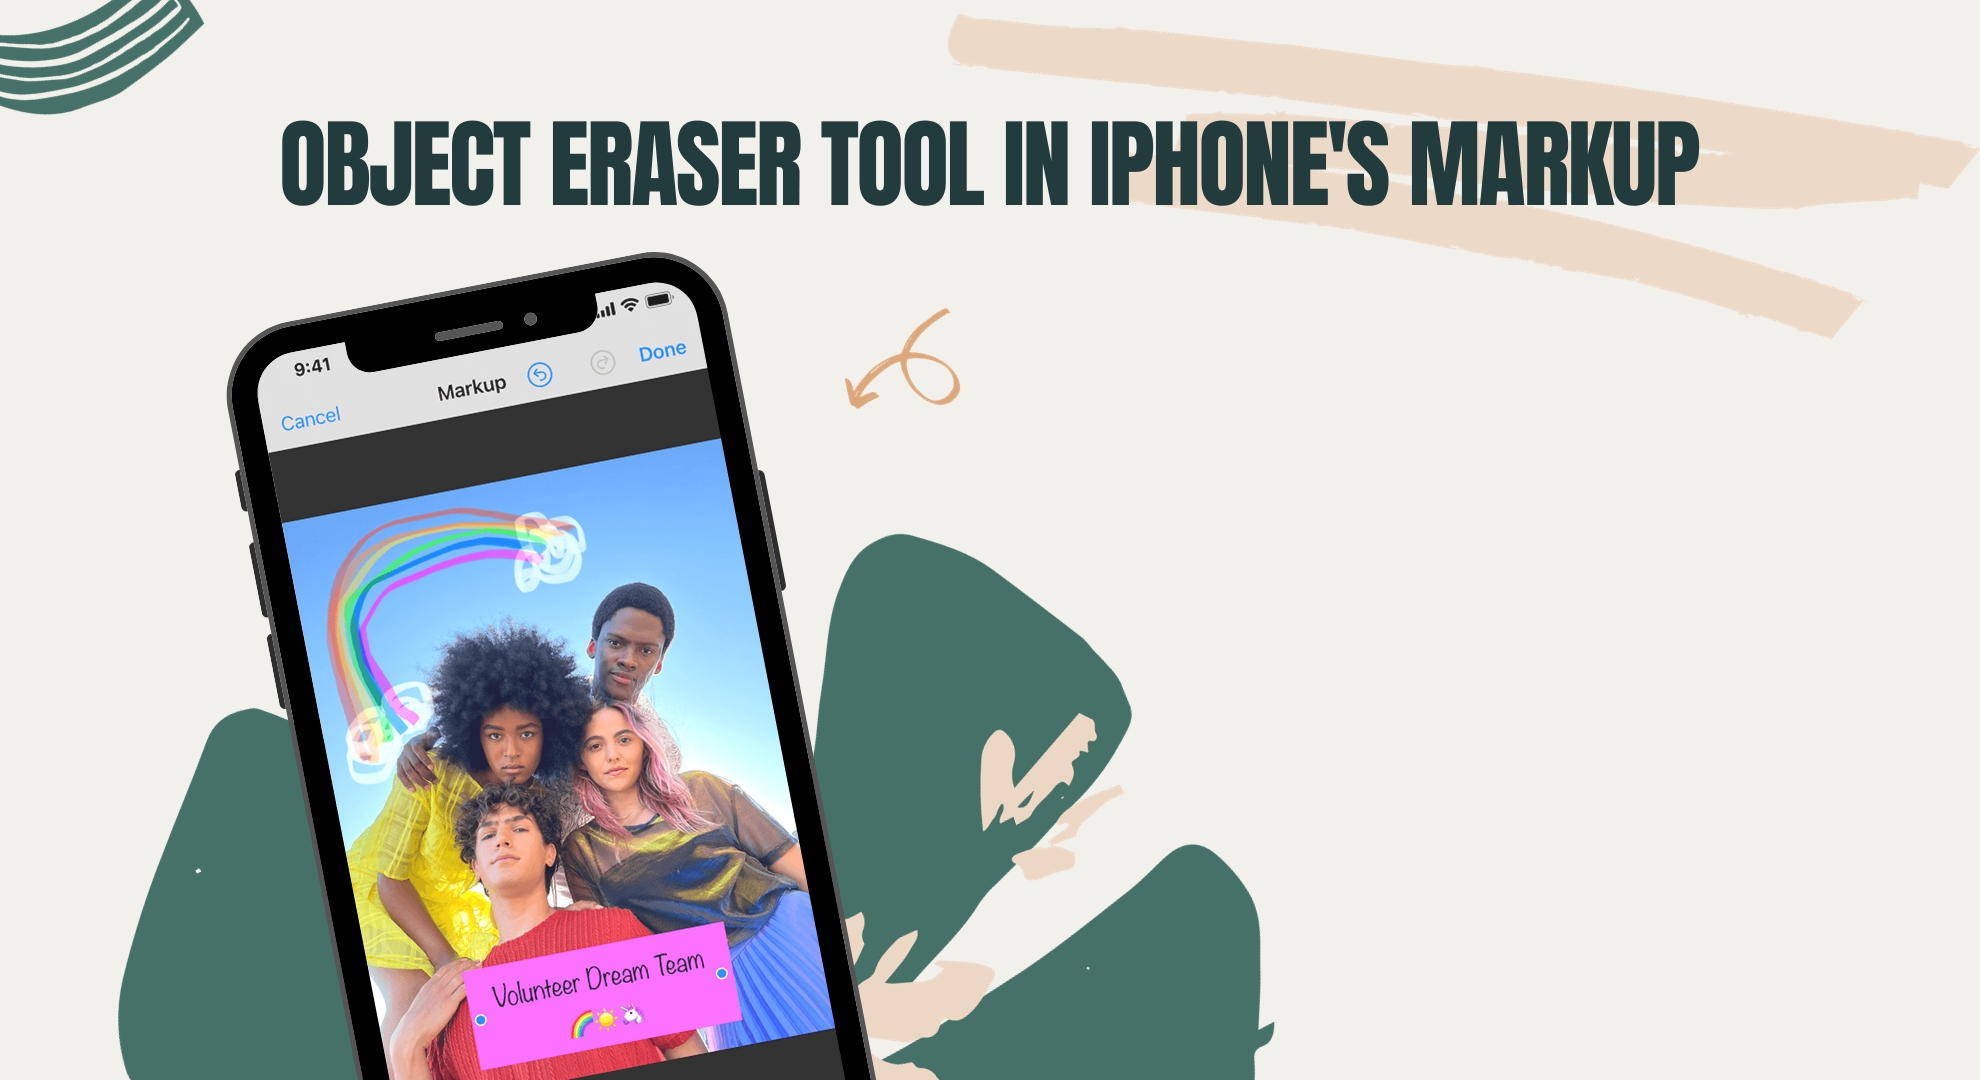 Understanding the Object Eraser tool in iPhone's Markup